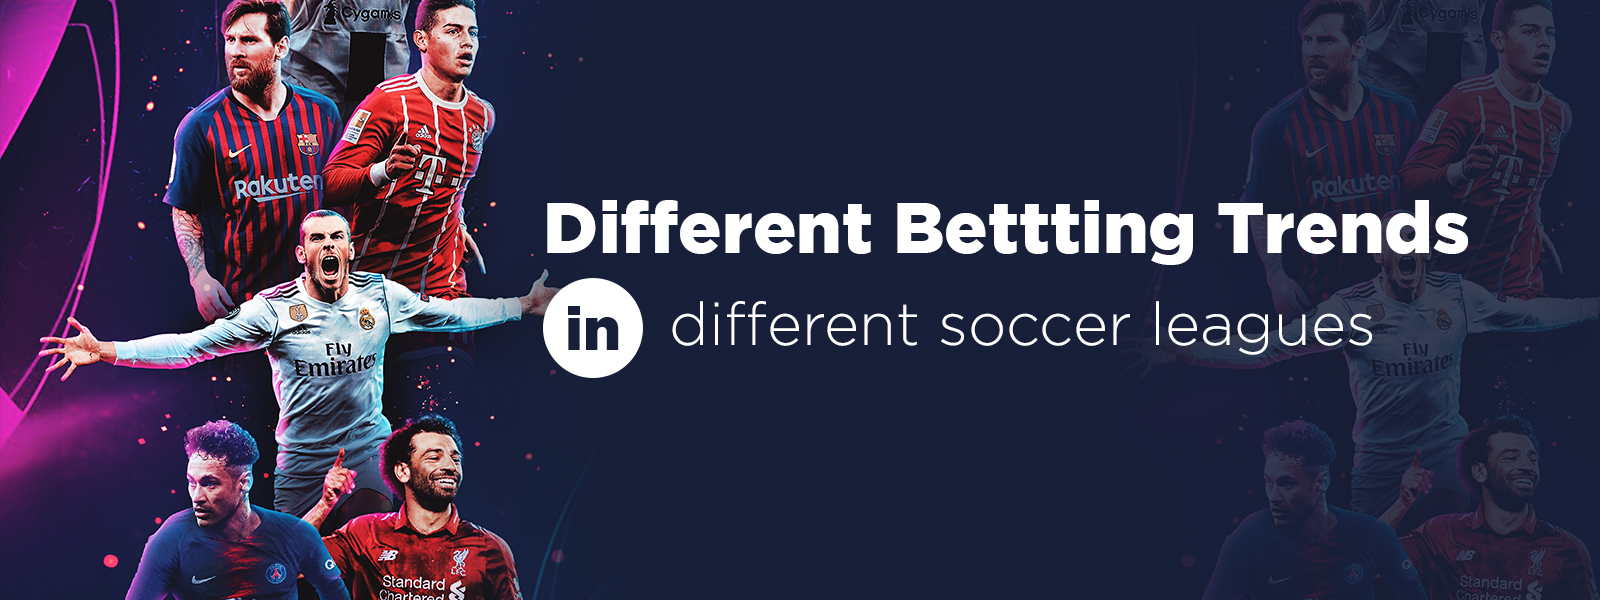 Different Betting Trends In Different Soccer Leagues